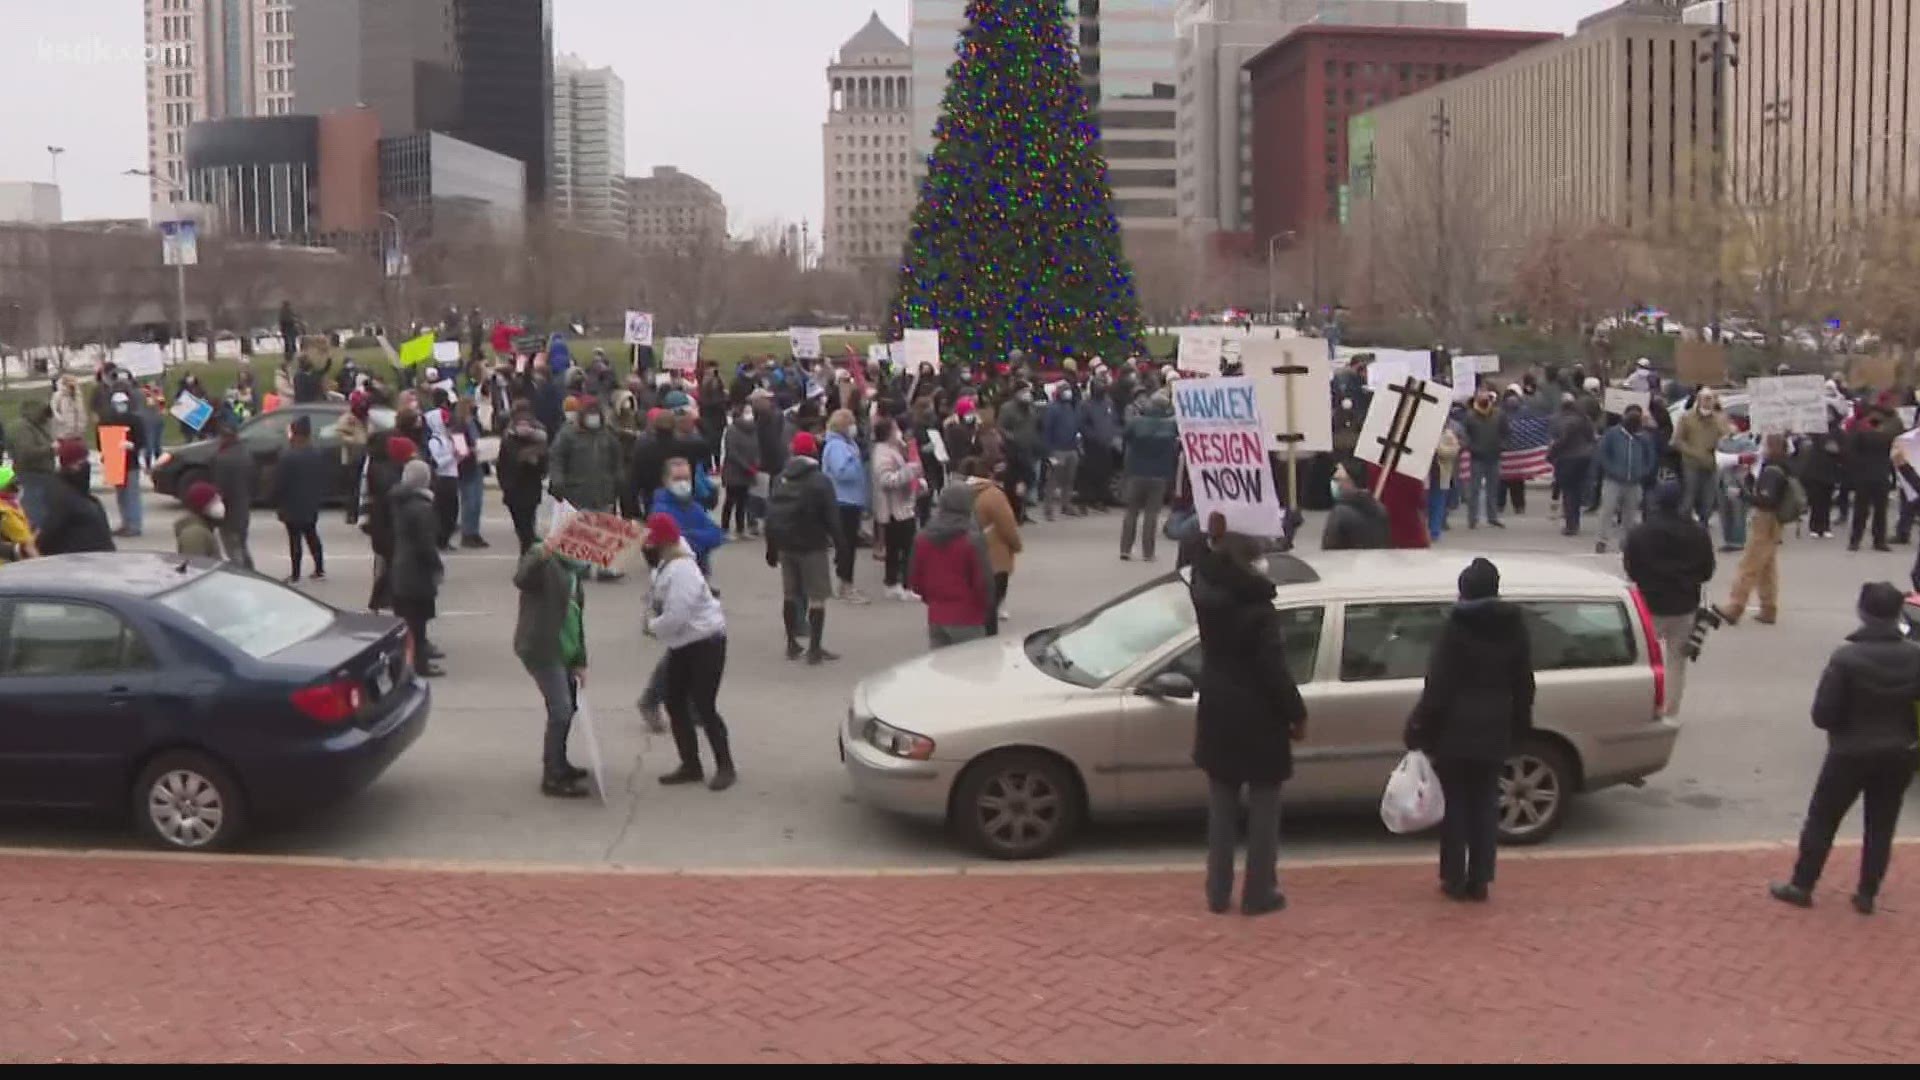 The protest was organized by Resist STL